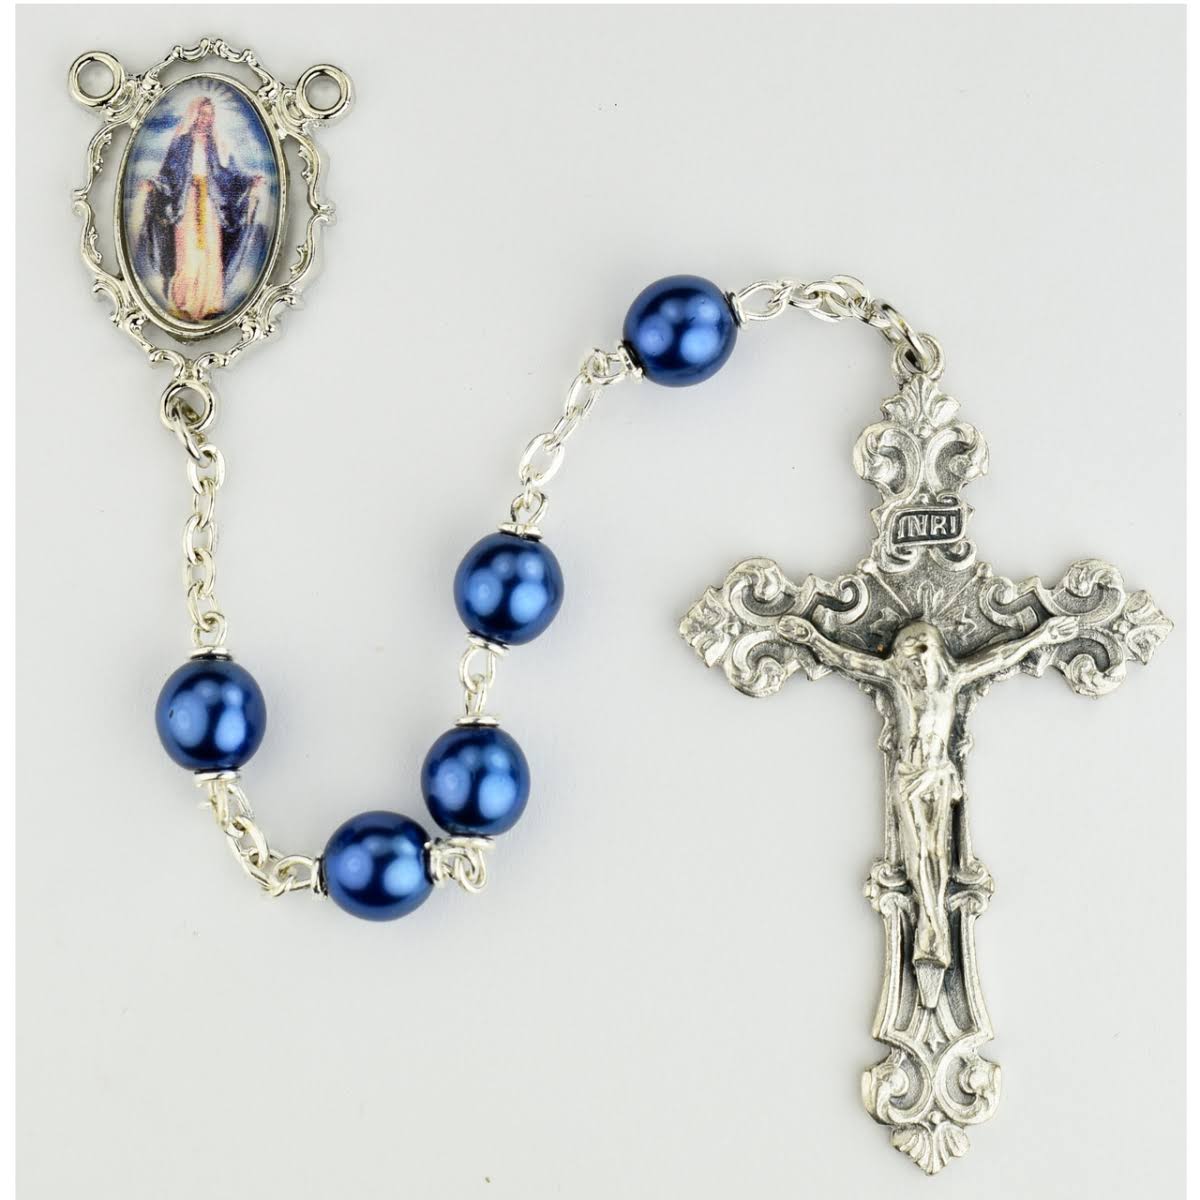 McVan R770F 7 mm Our Lady of Grace Decal Cross Rosary Set - Blue